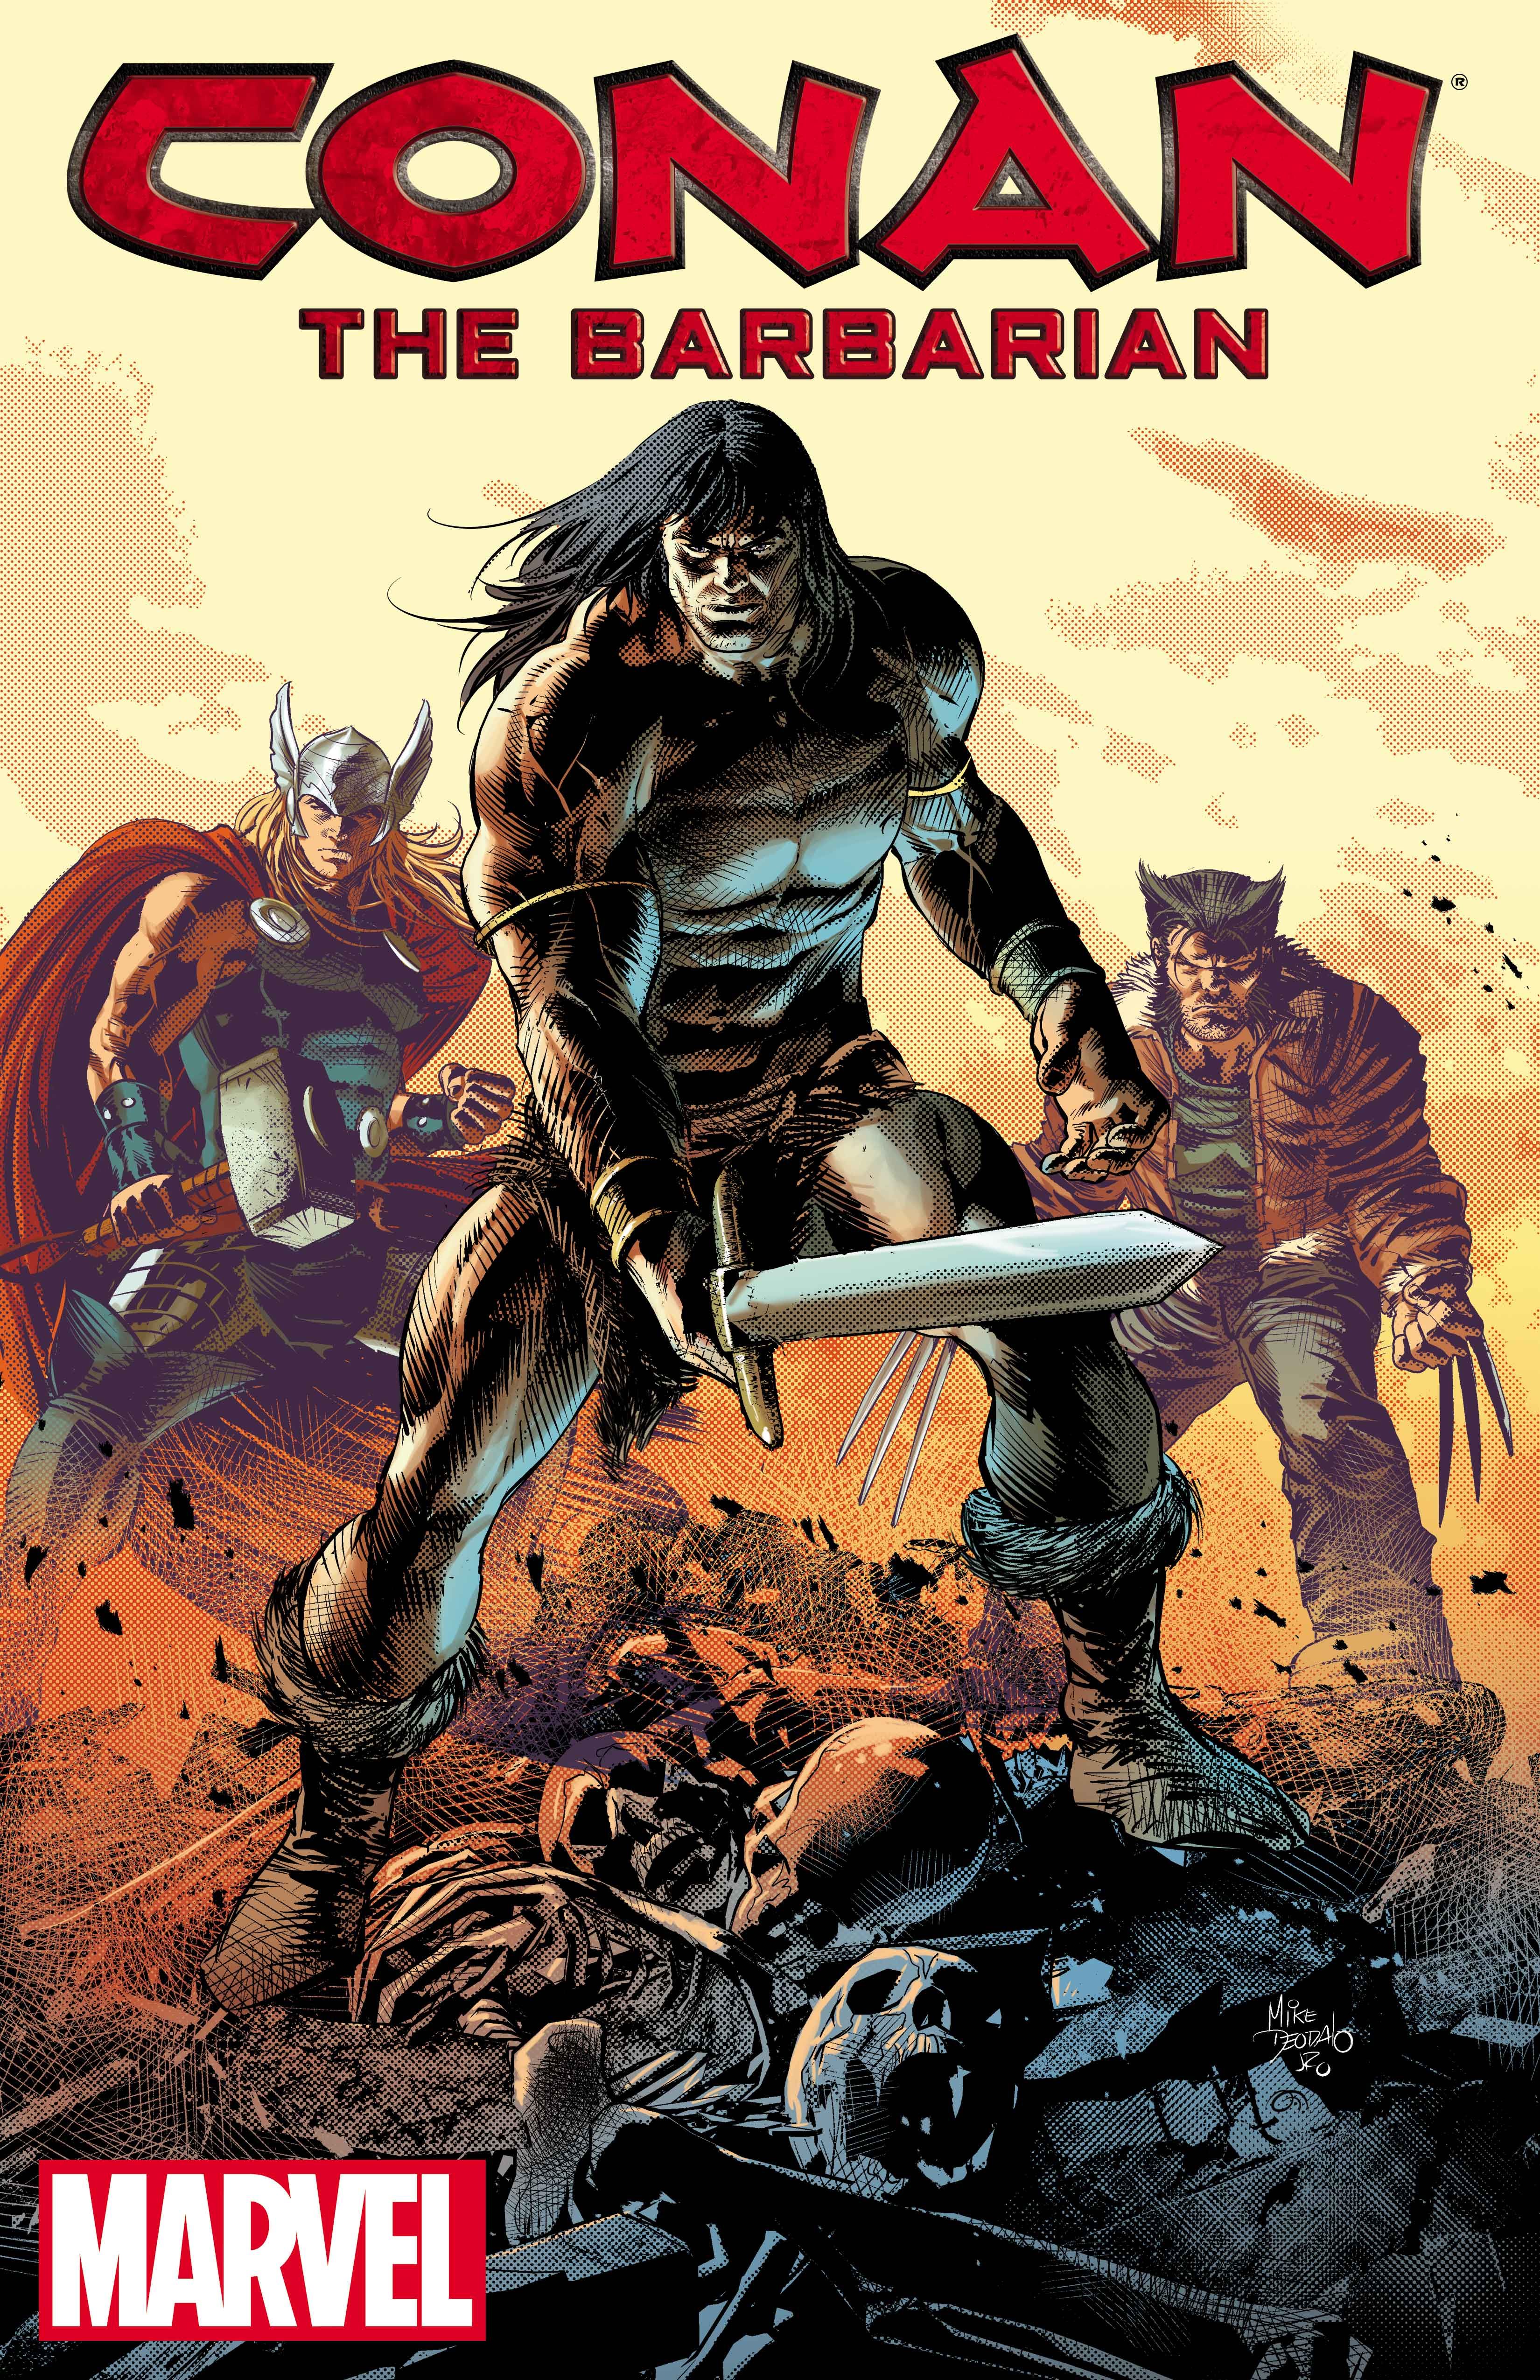 Conan Returns to Marvel Comics For New Series in 2019